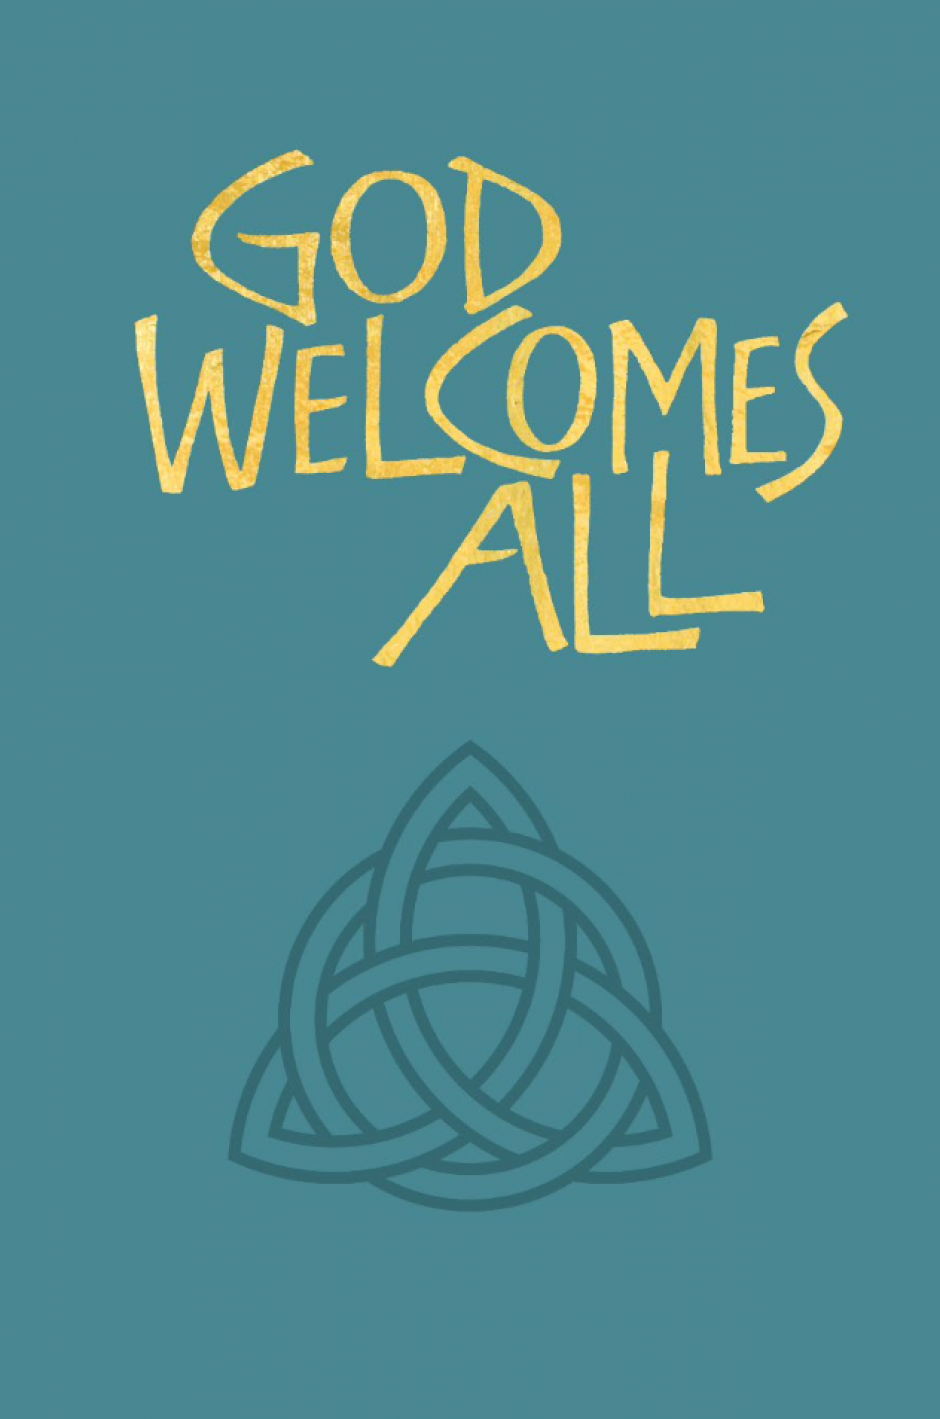 God welcomes all